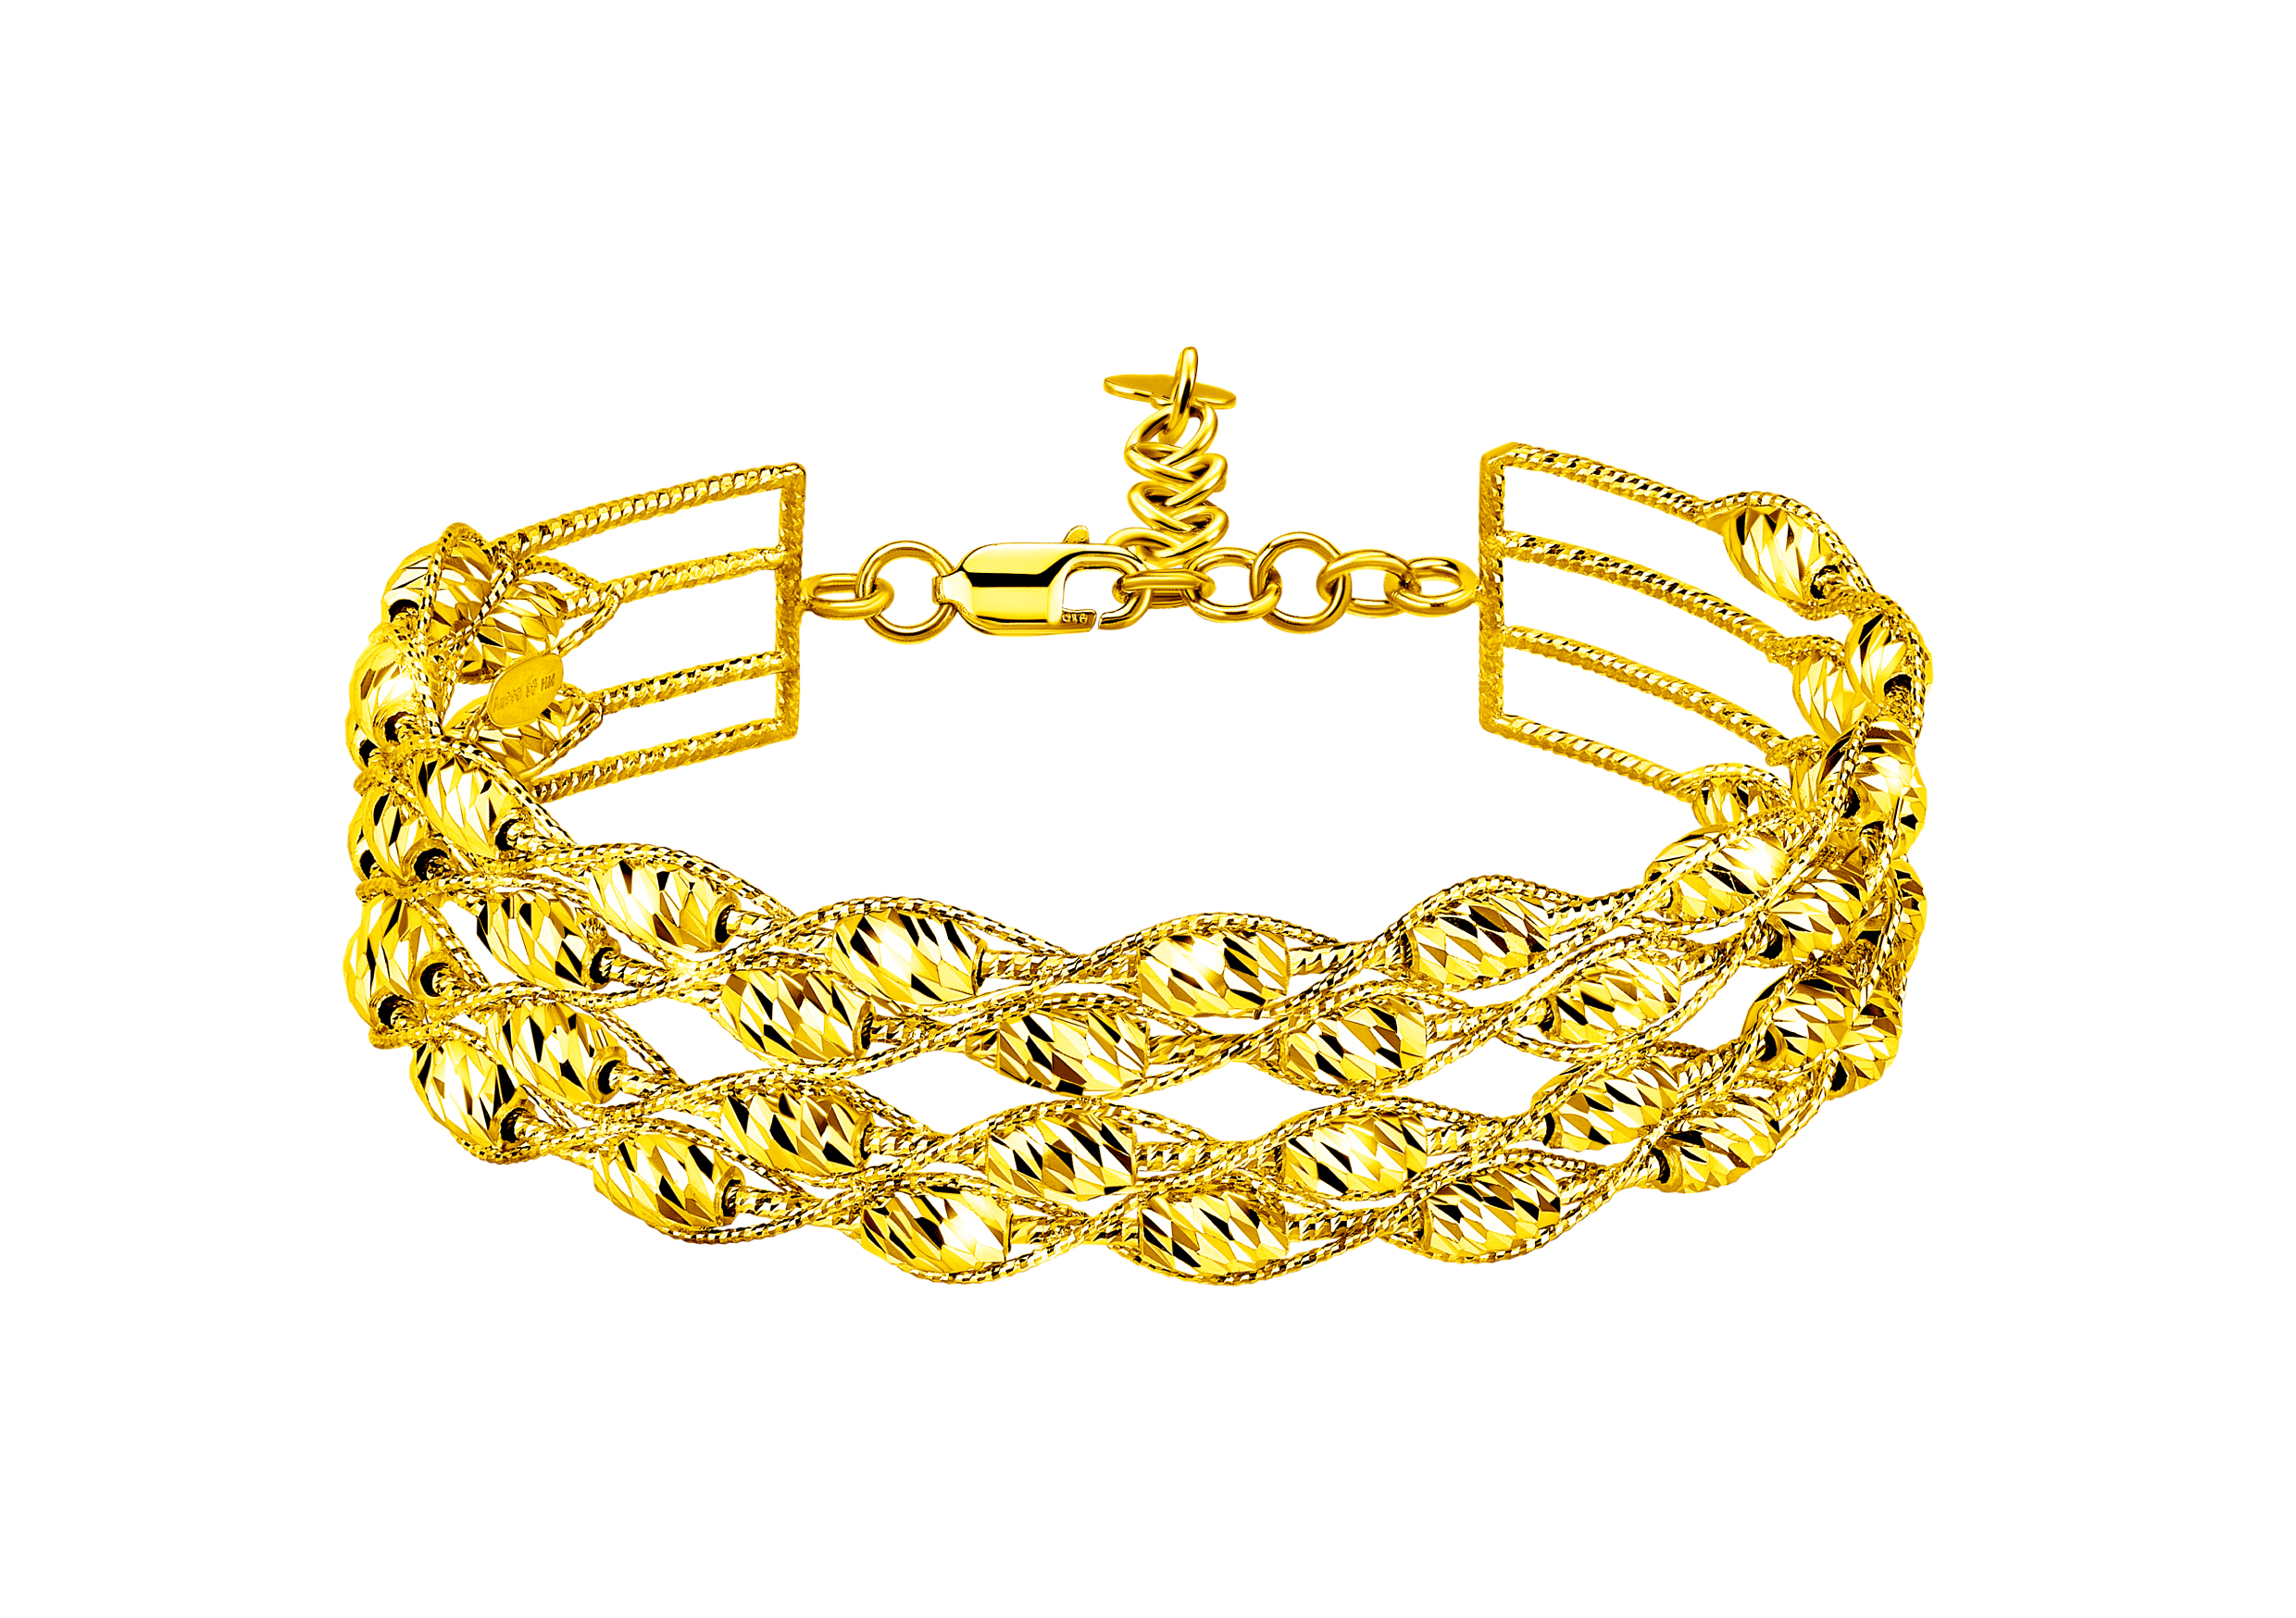 Goldstyle "Glorious" Gold Bangle